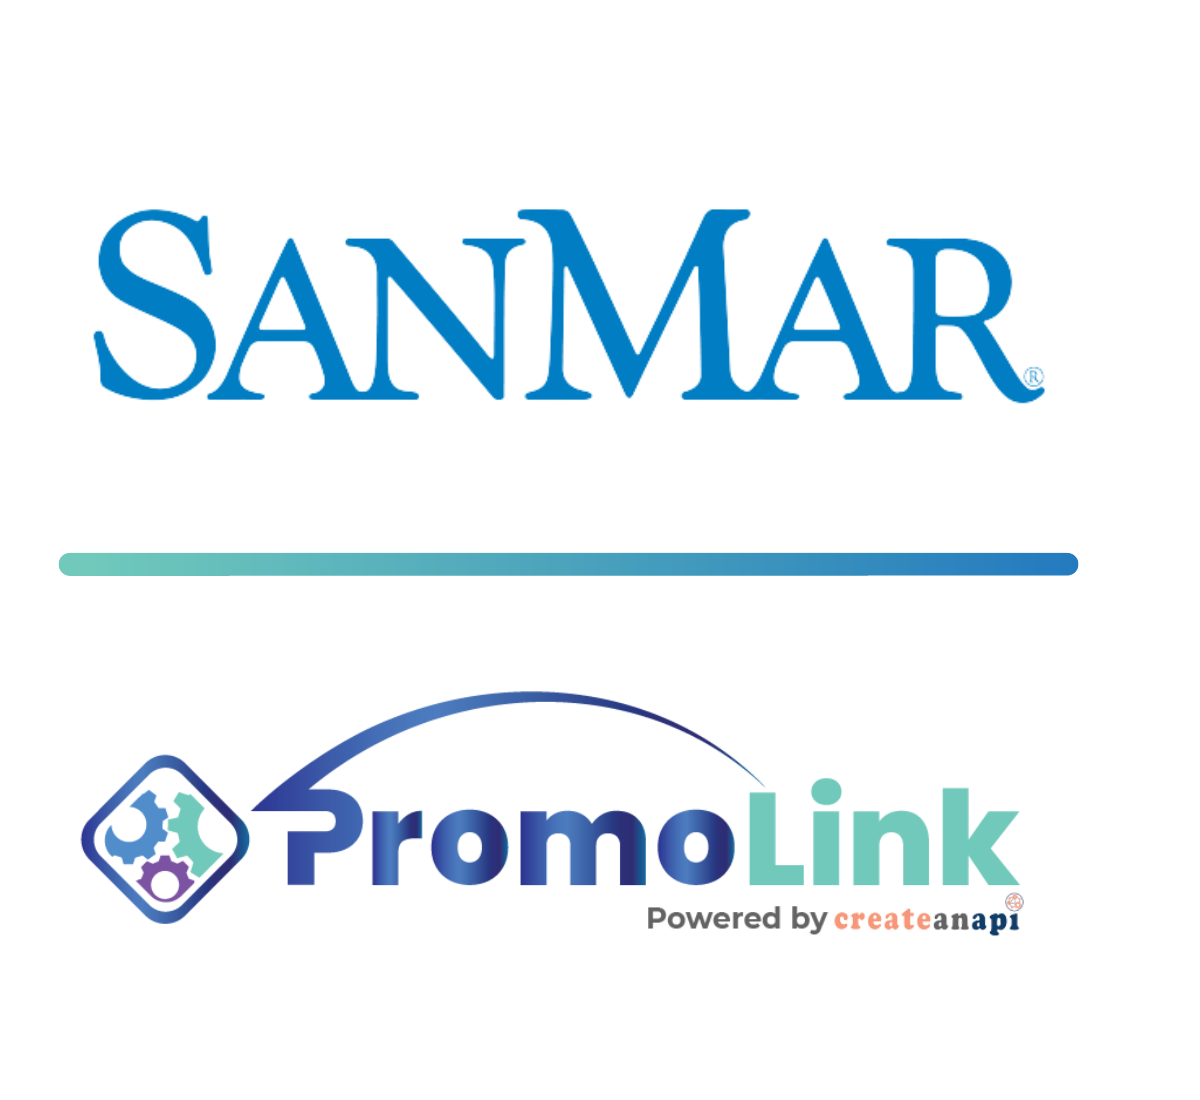 
Integrate your platform to Sanmar quickly, effectively, 
and seamlessly